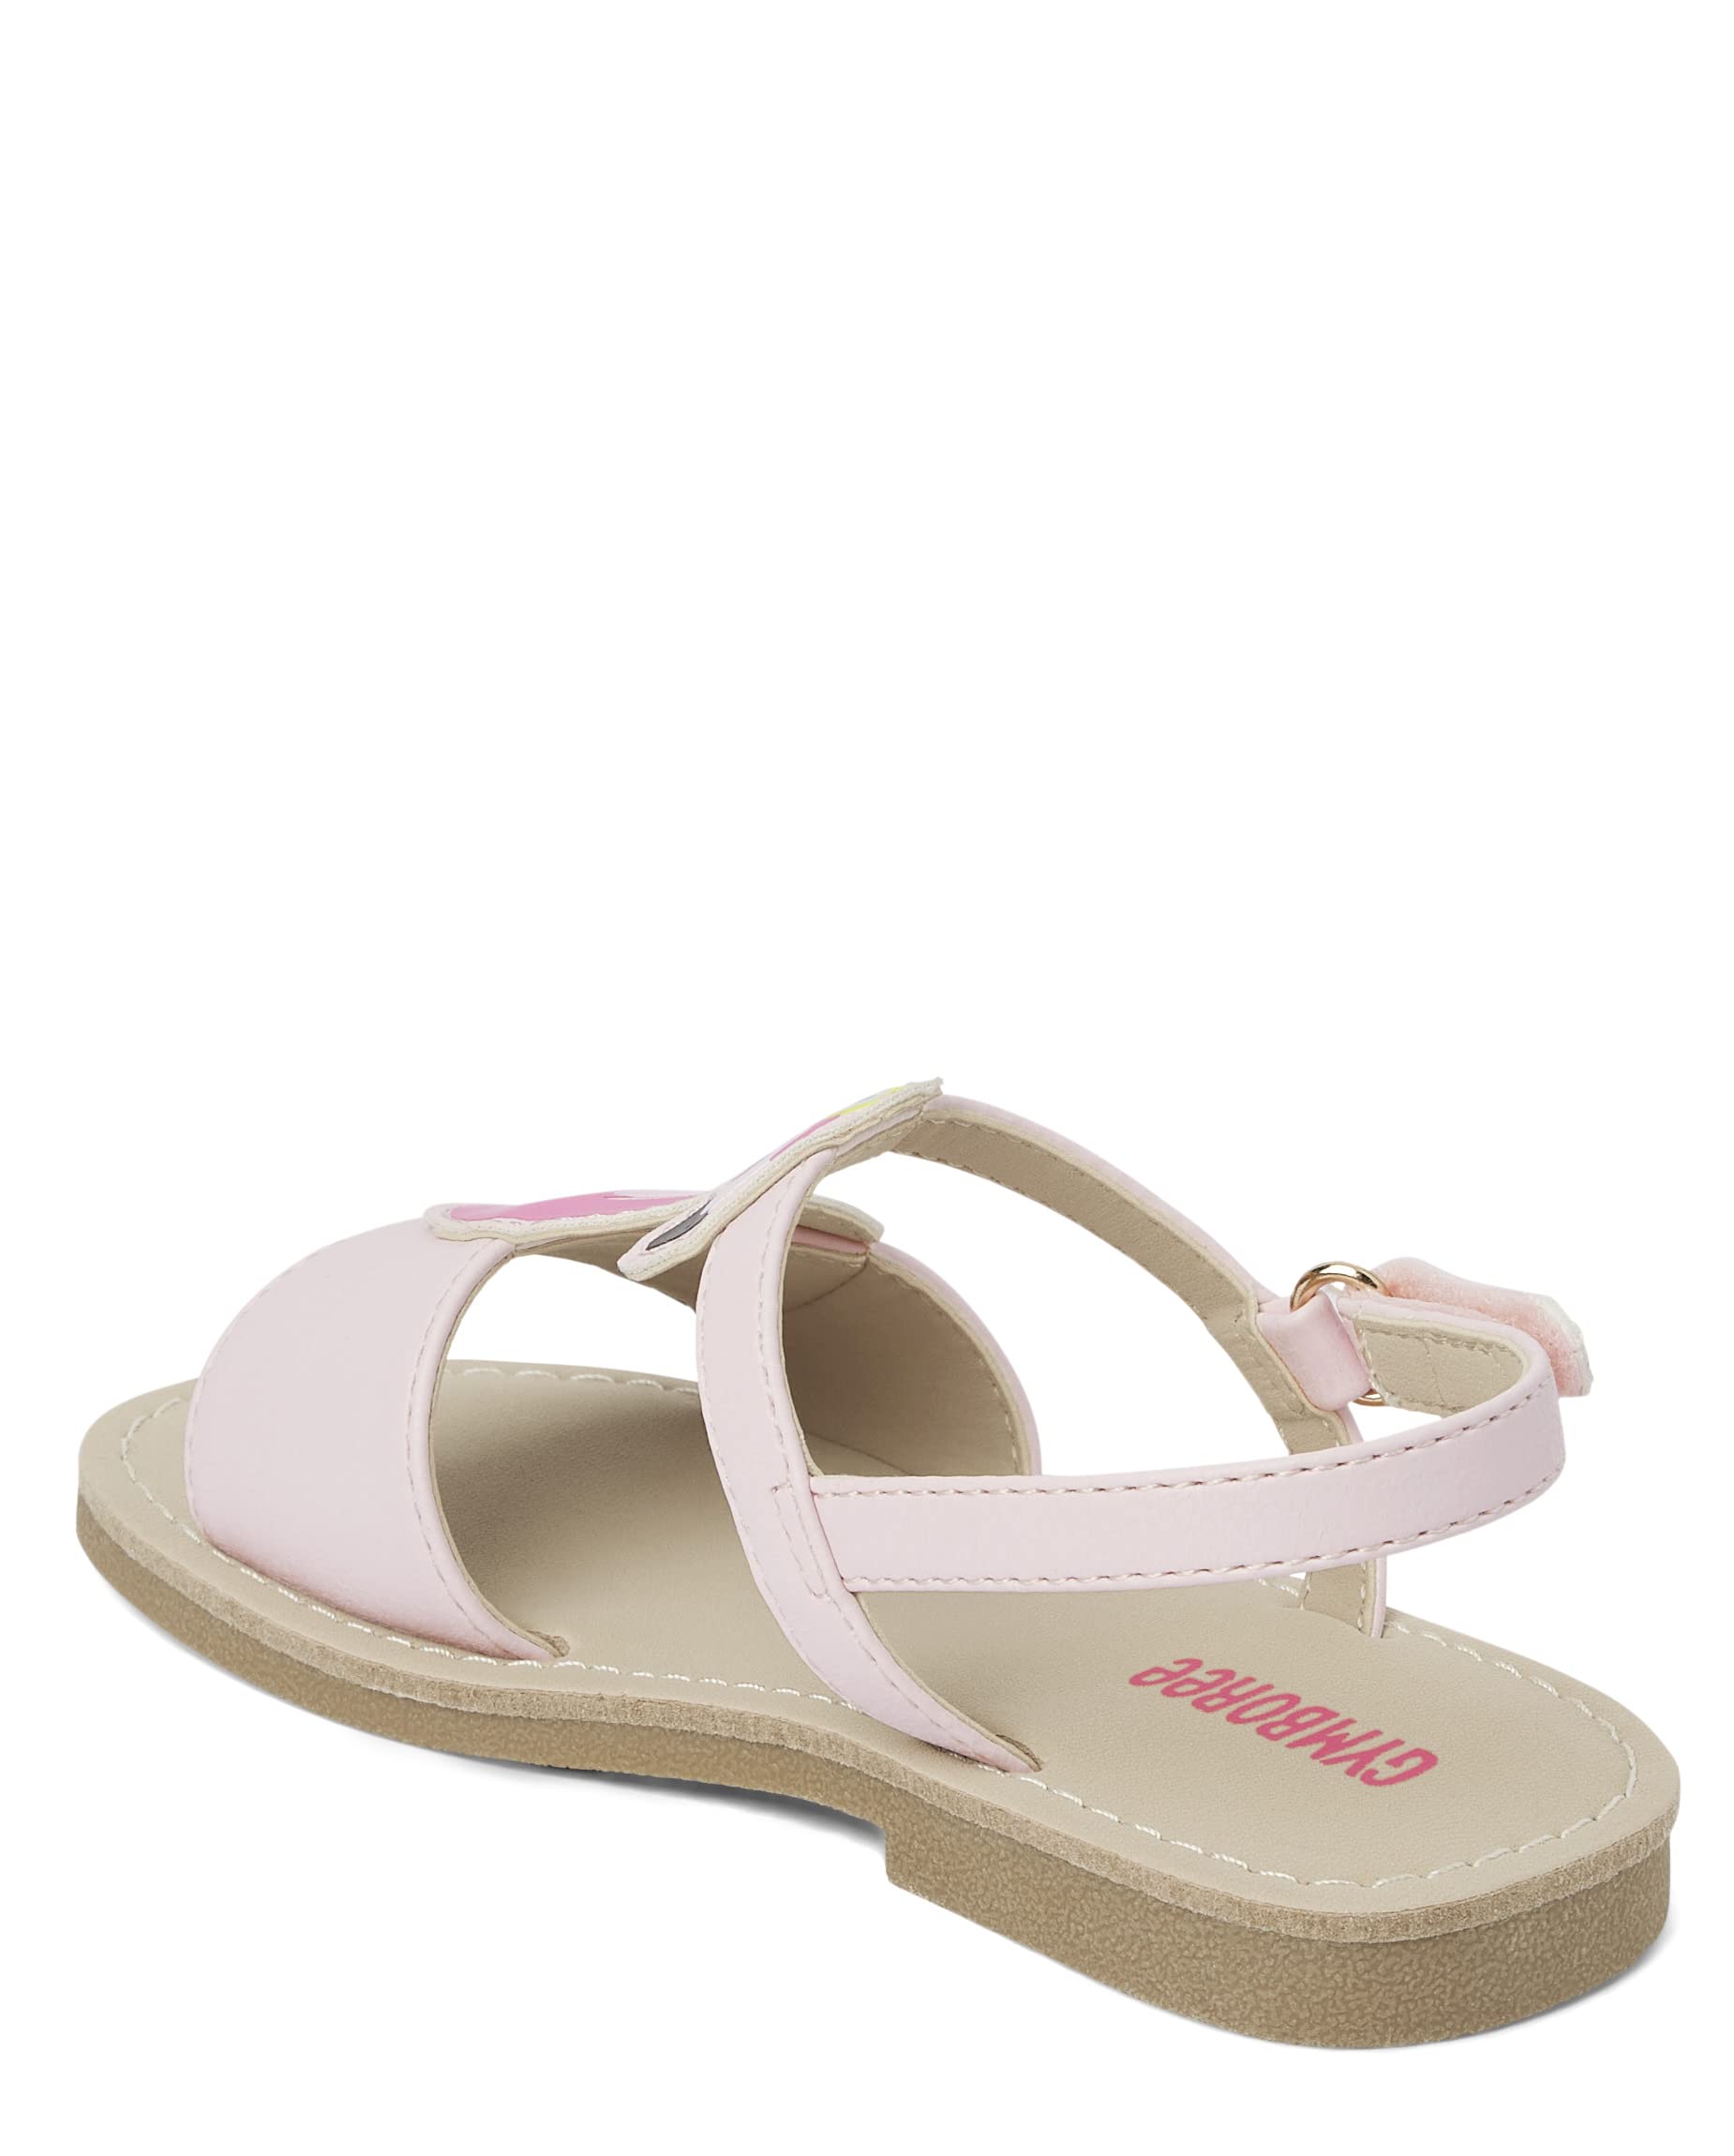 Gymboree Girl's and Toddler Flat Sandals